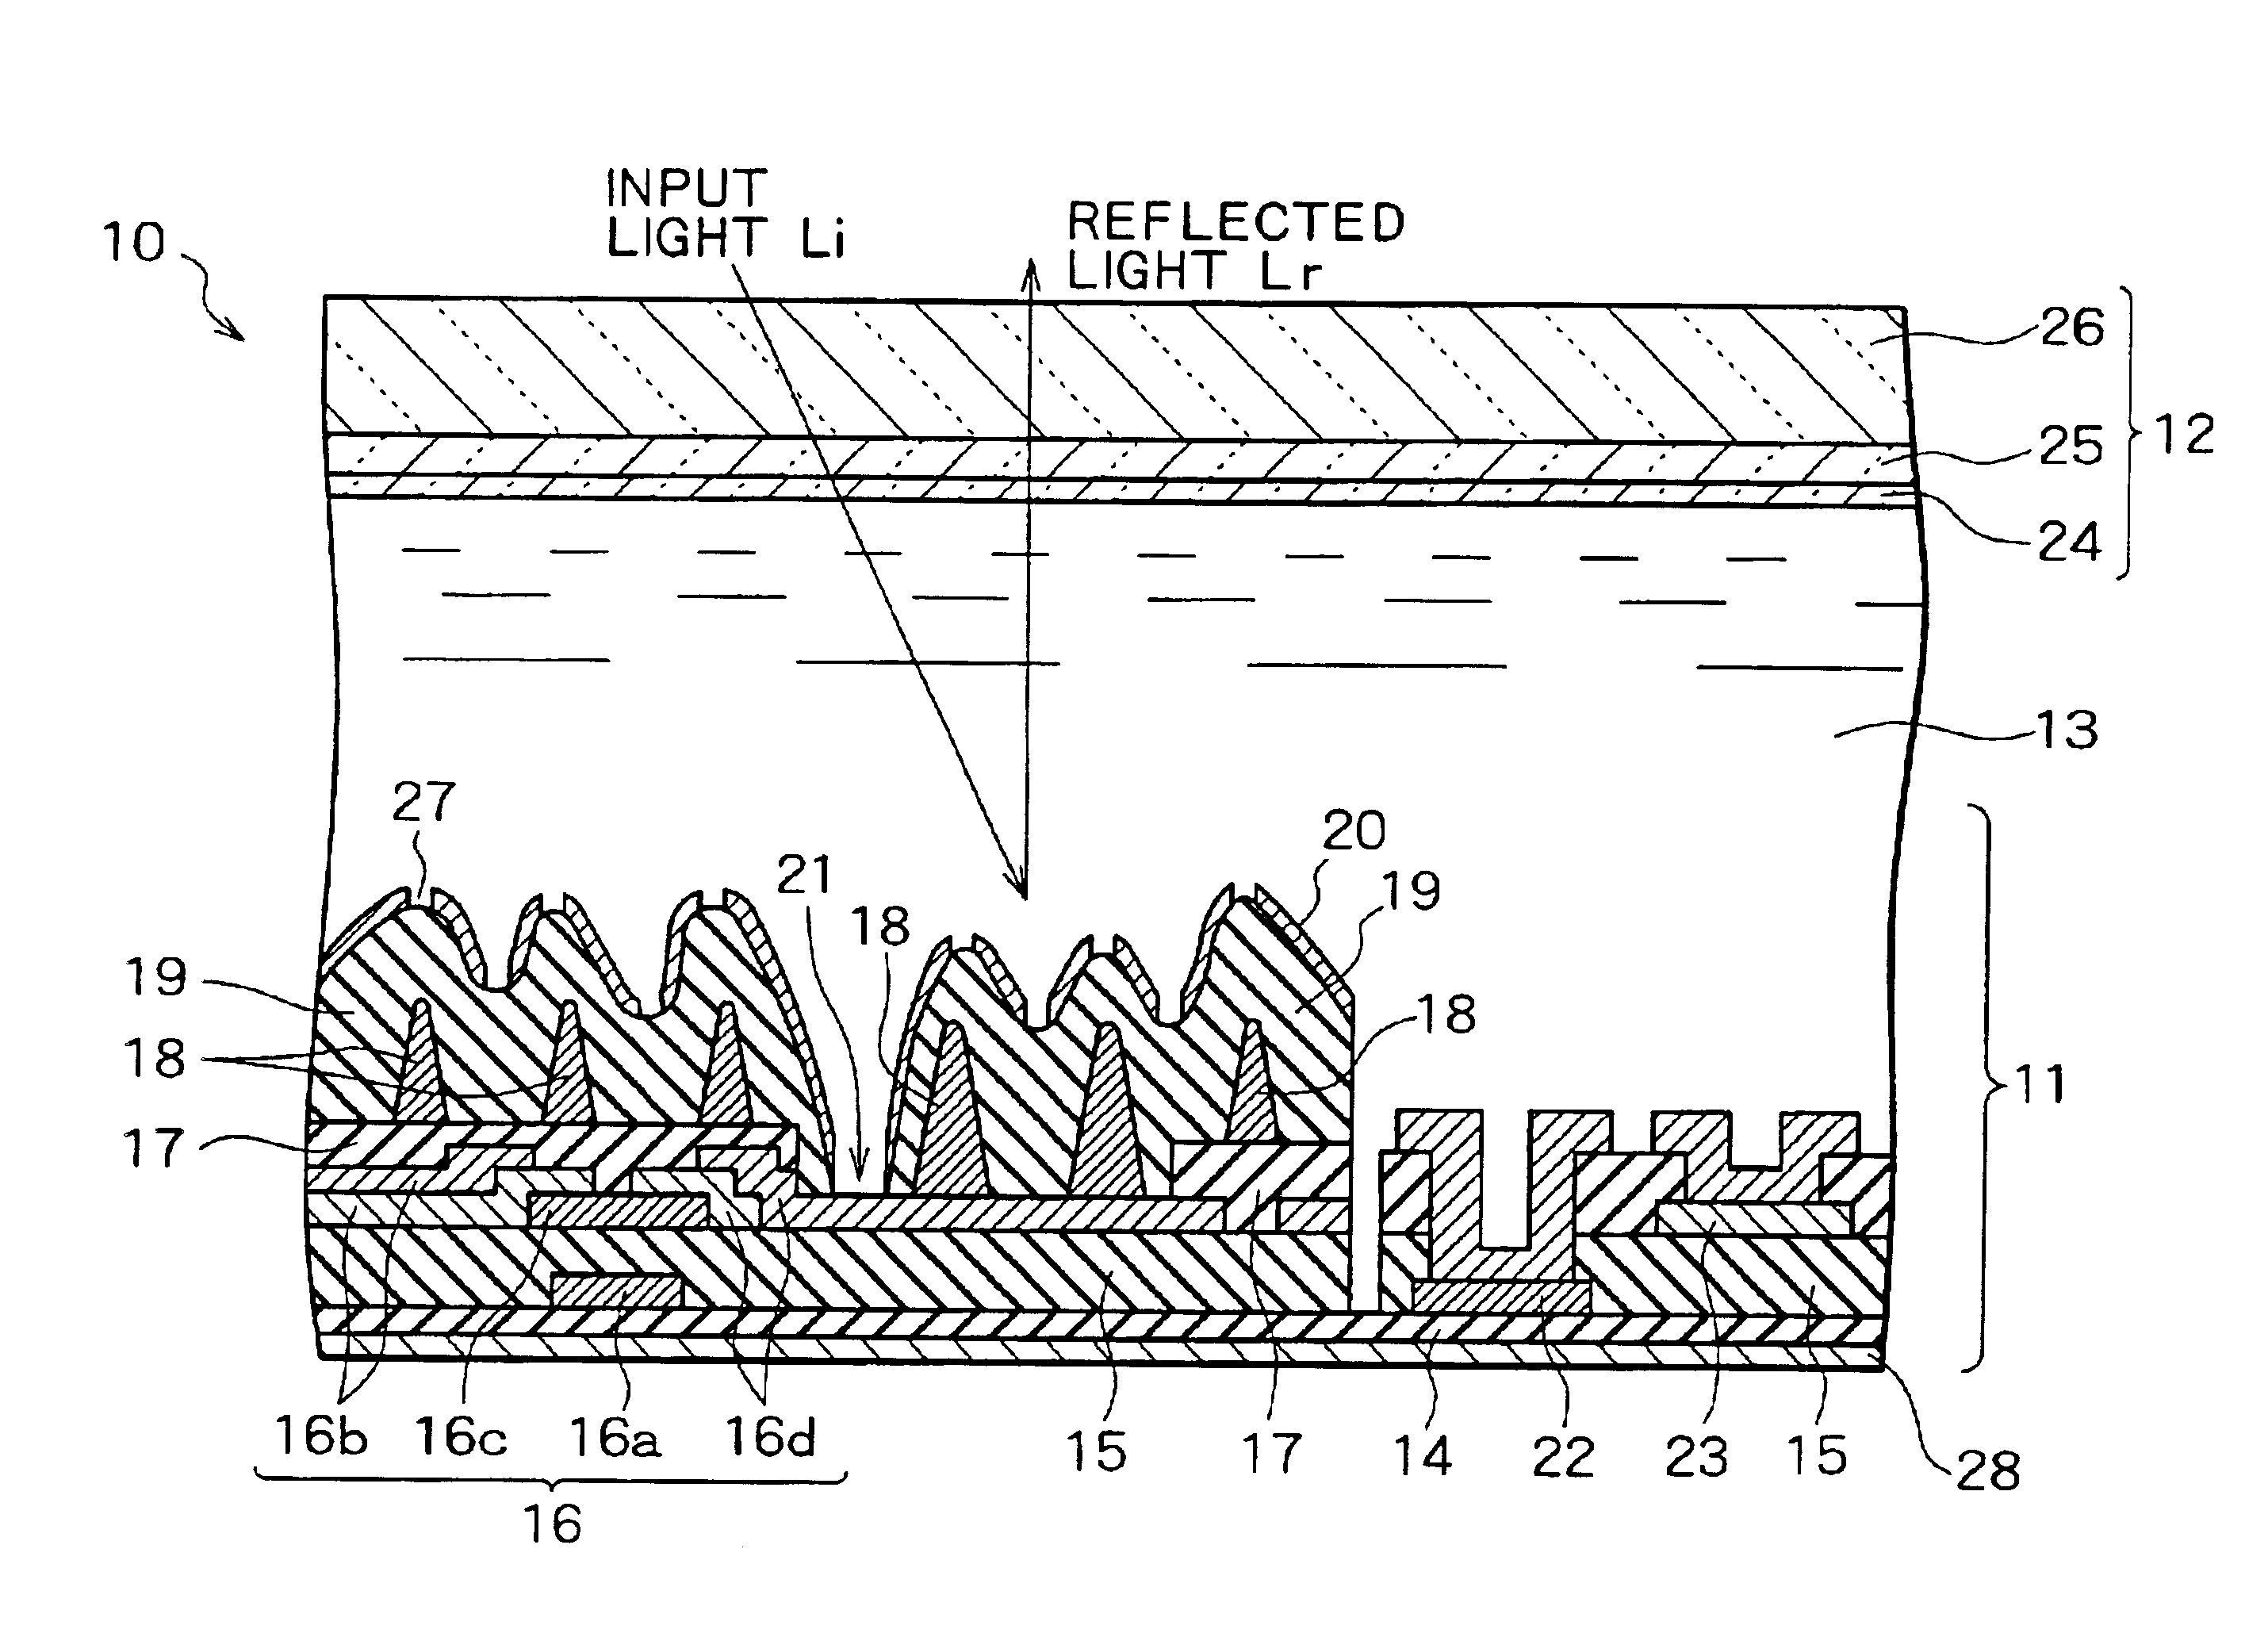 Liquid crystal display having undulated anisotropic reflection electrodes and openings therein